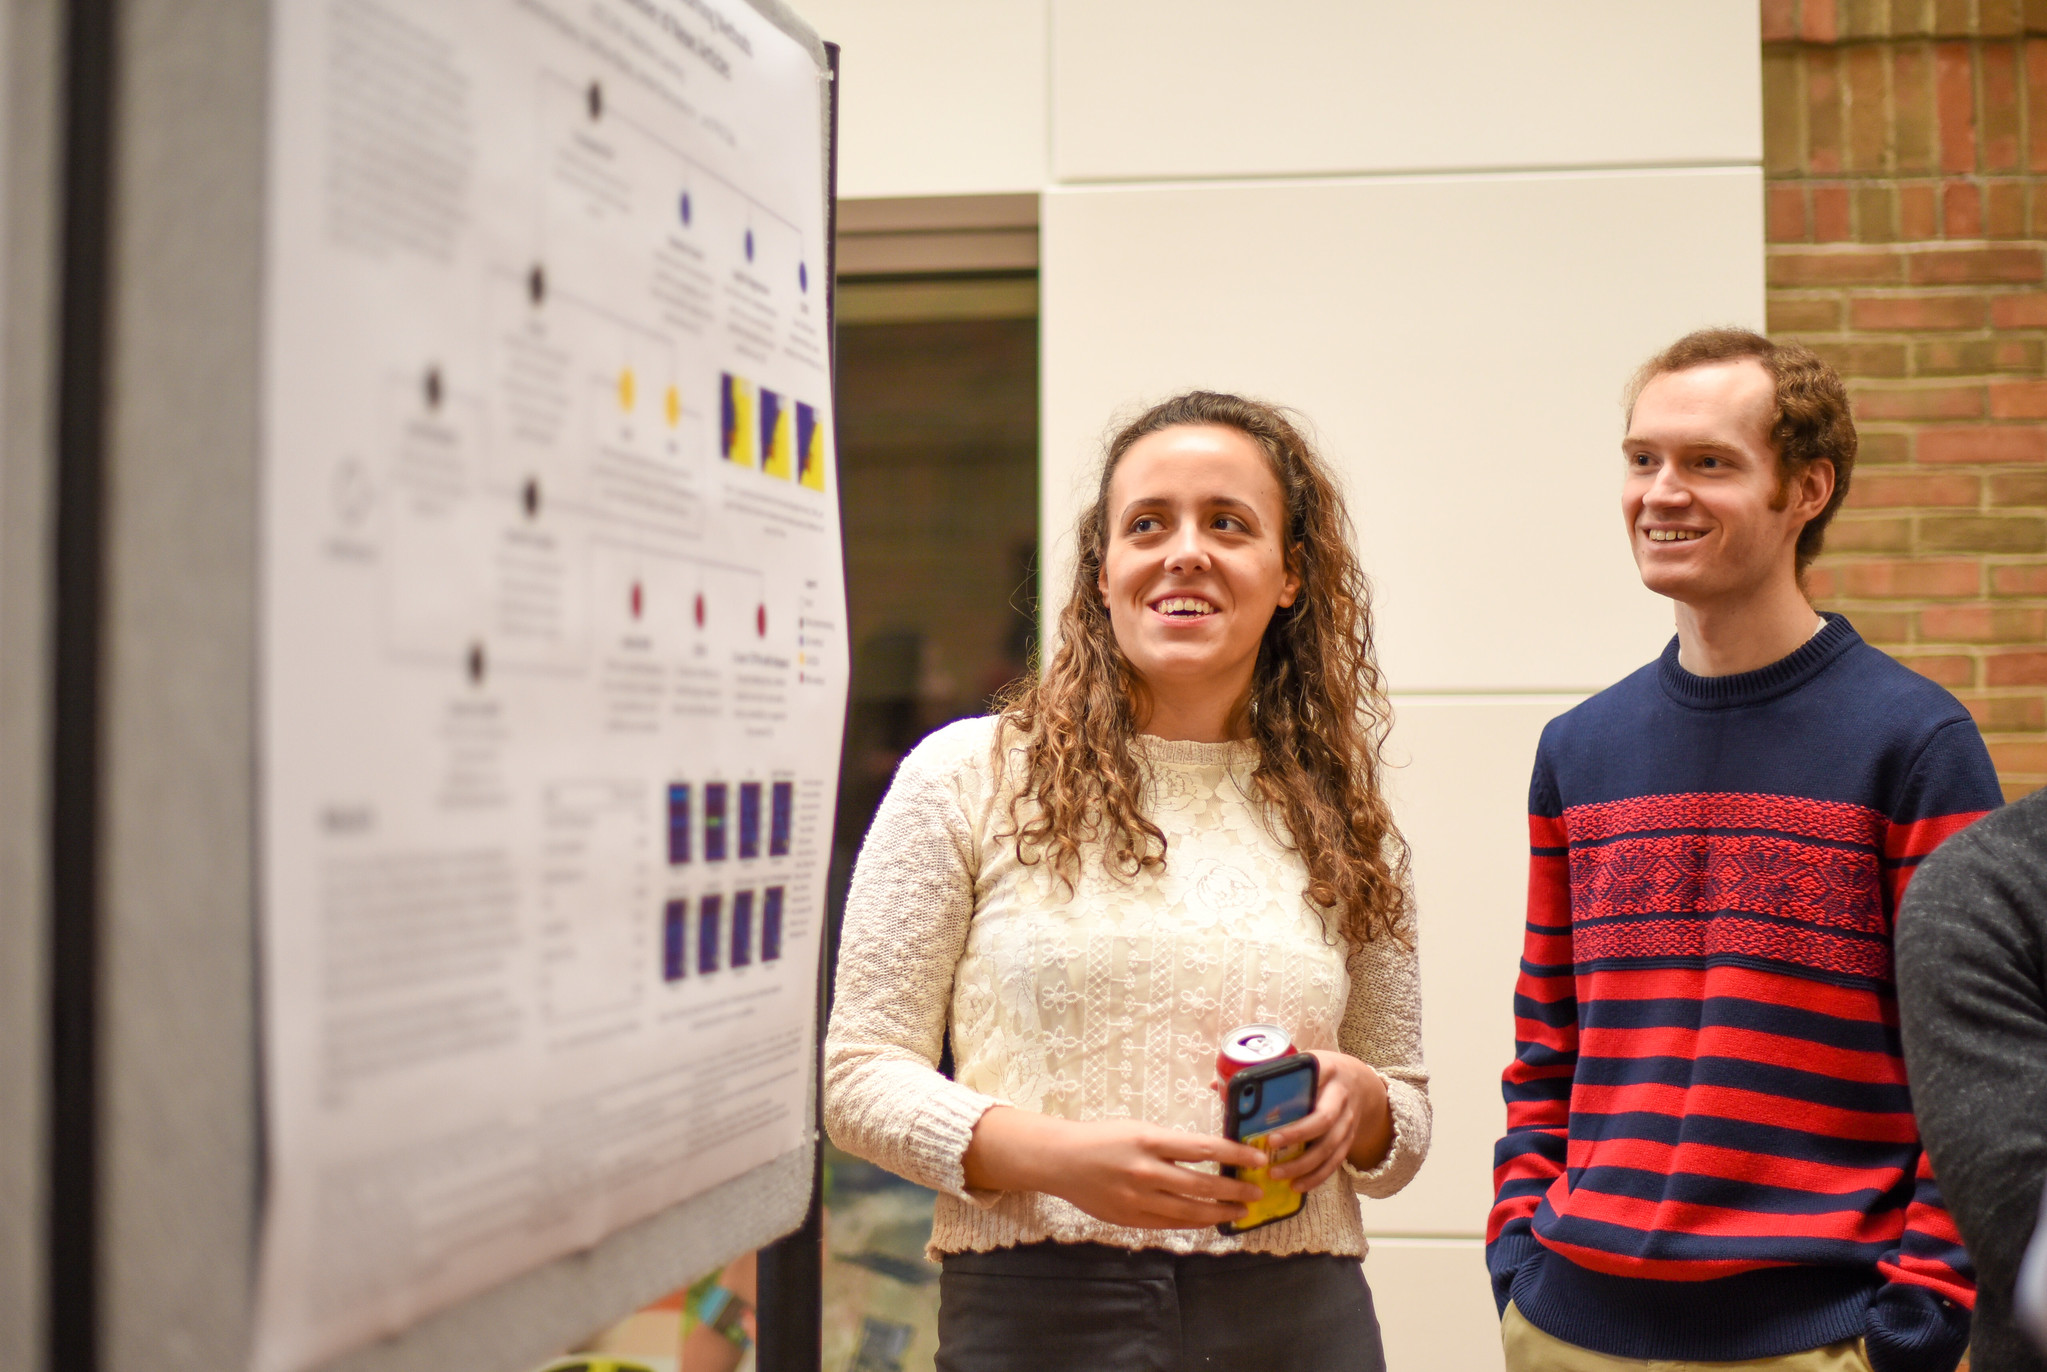 Students at the poster session